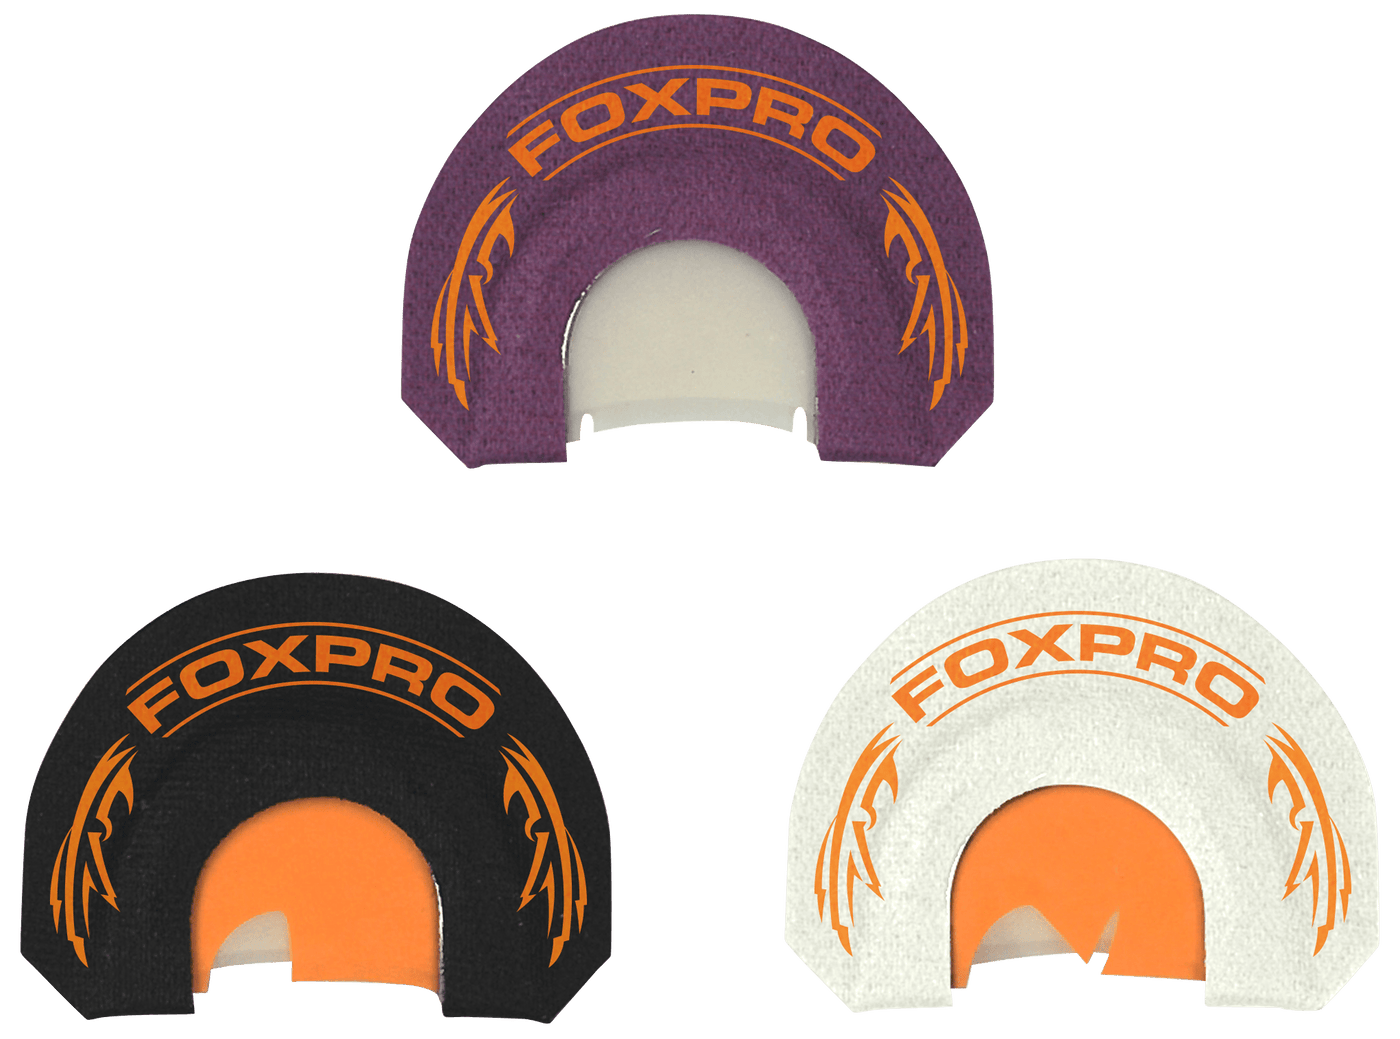 Foxpro Foxpro Crooked Spur, Foxpro Hybrid Spur Combo  Hybrid Spur Combo Pack Hunting